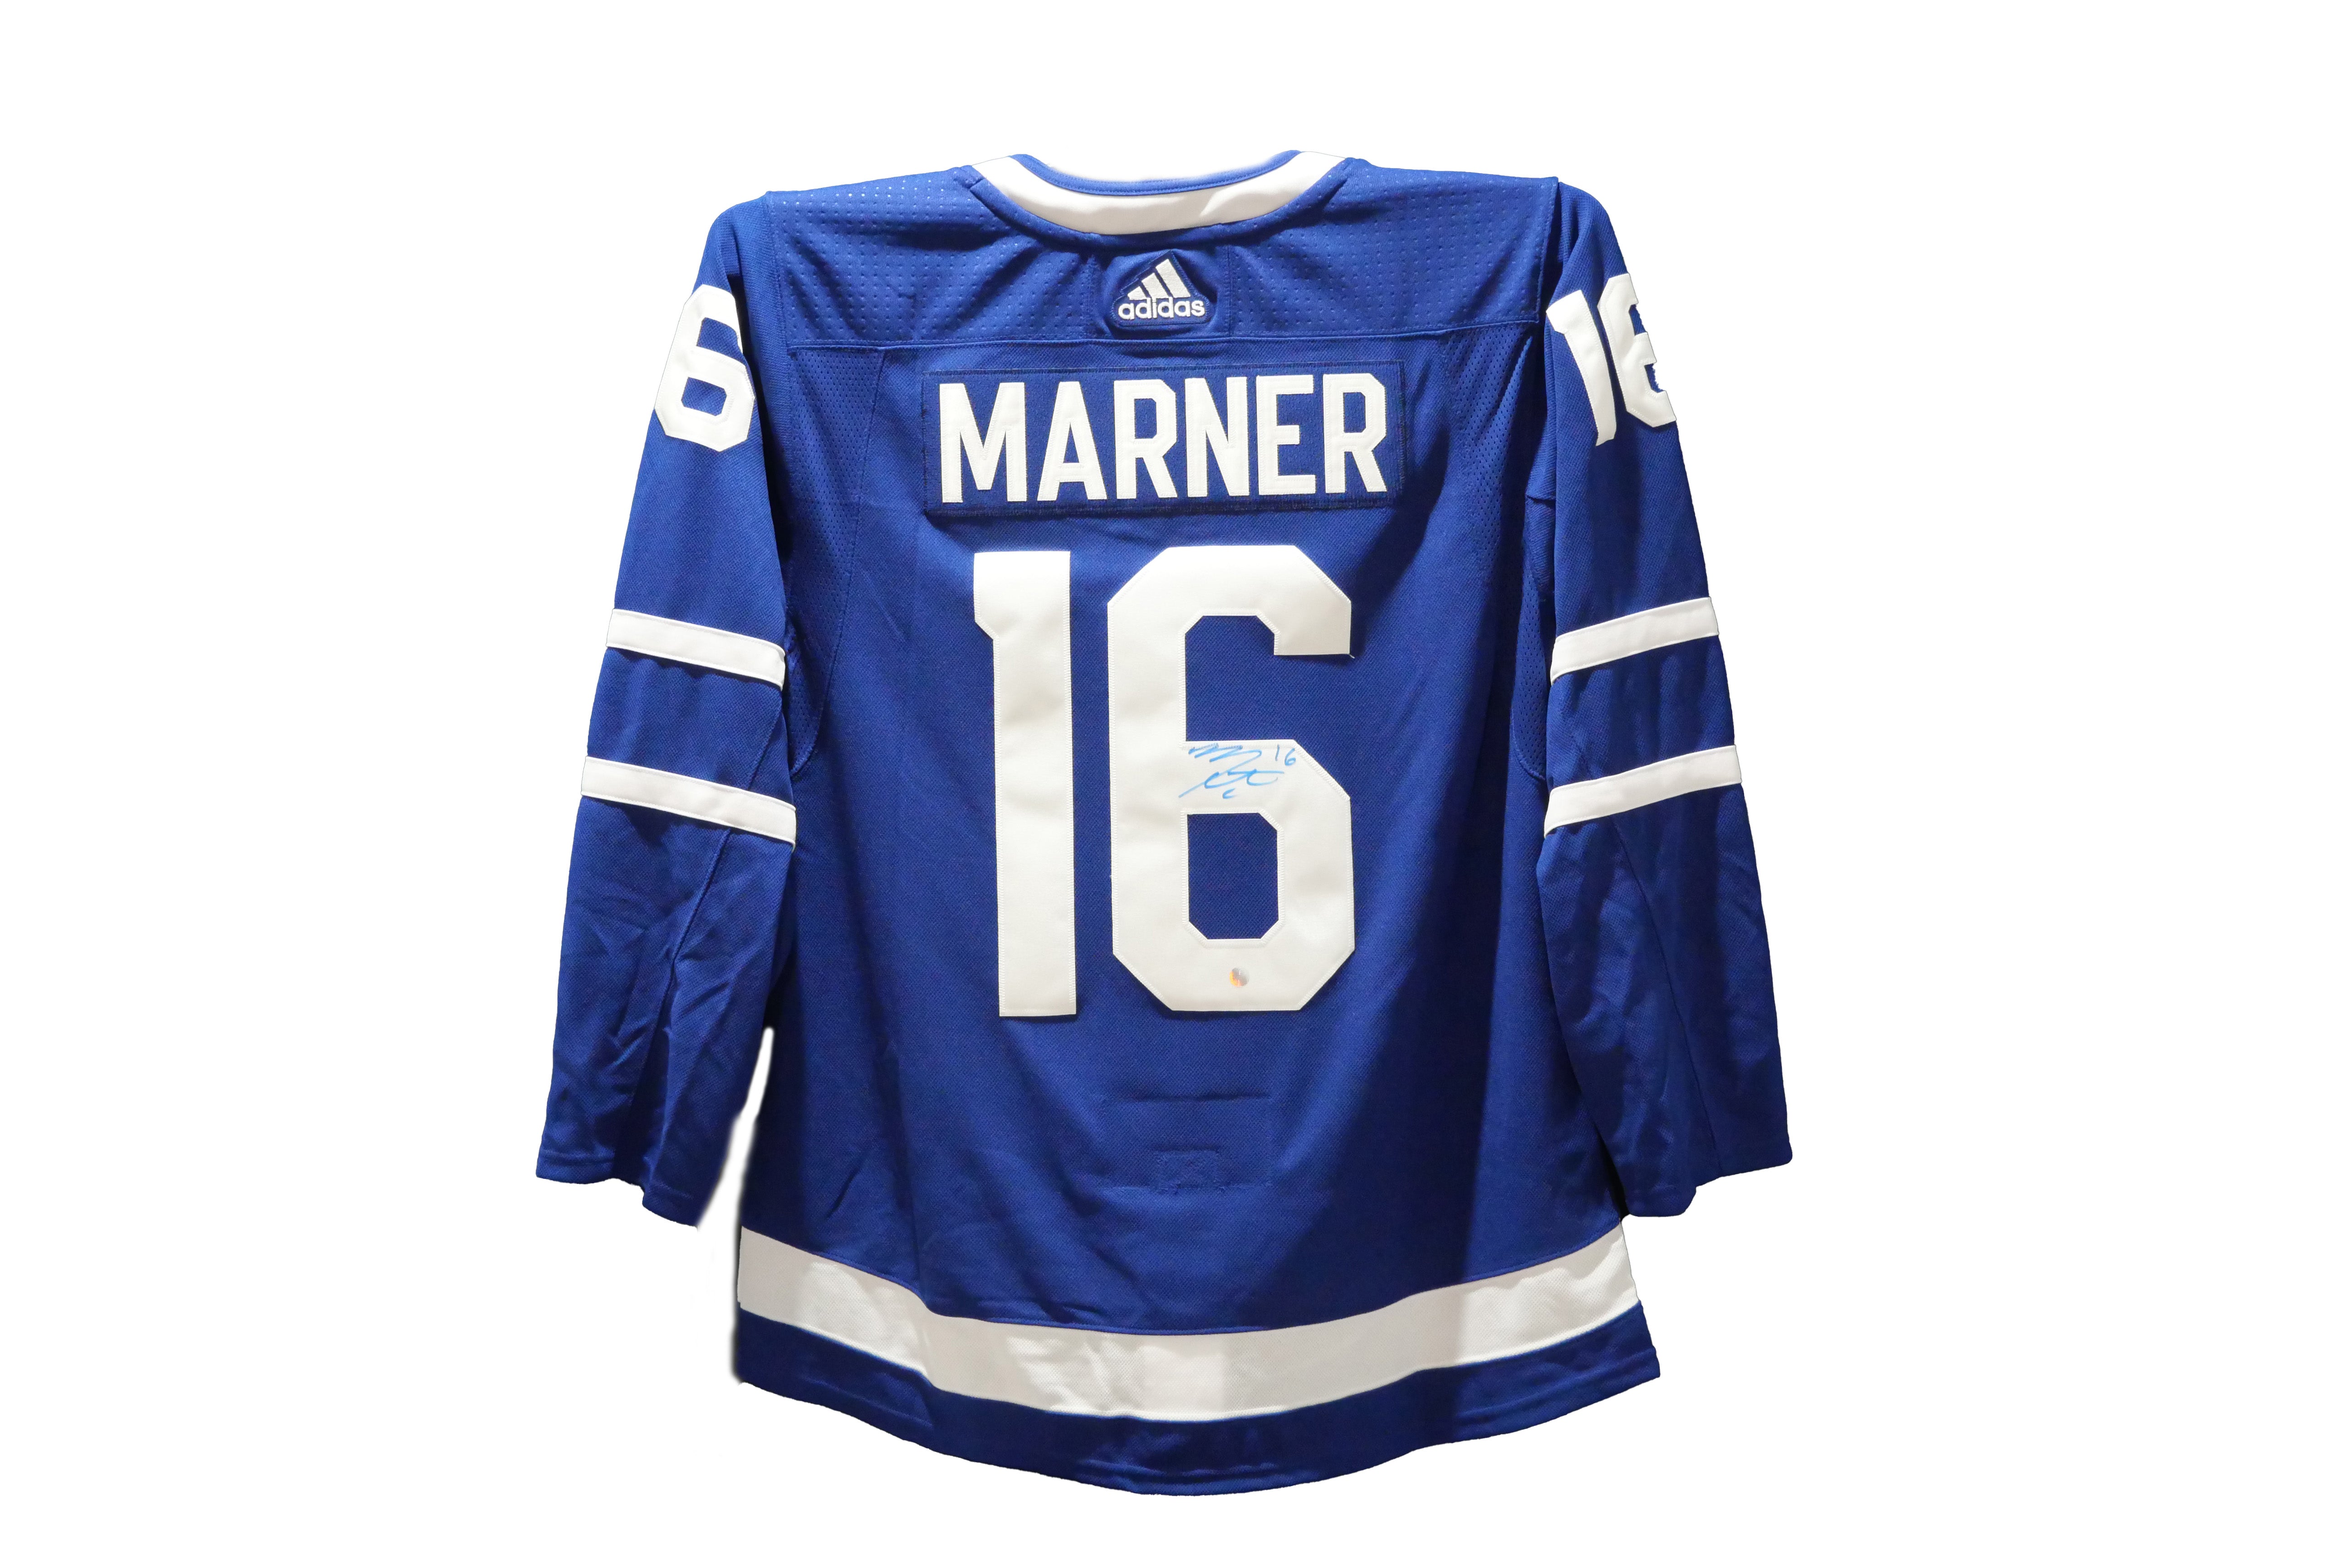 Mitch Marner Authentic Autographed Jersey & Framed Puck Package Deal